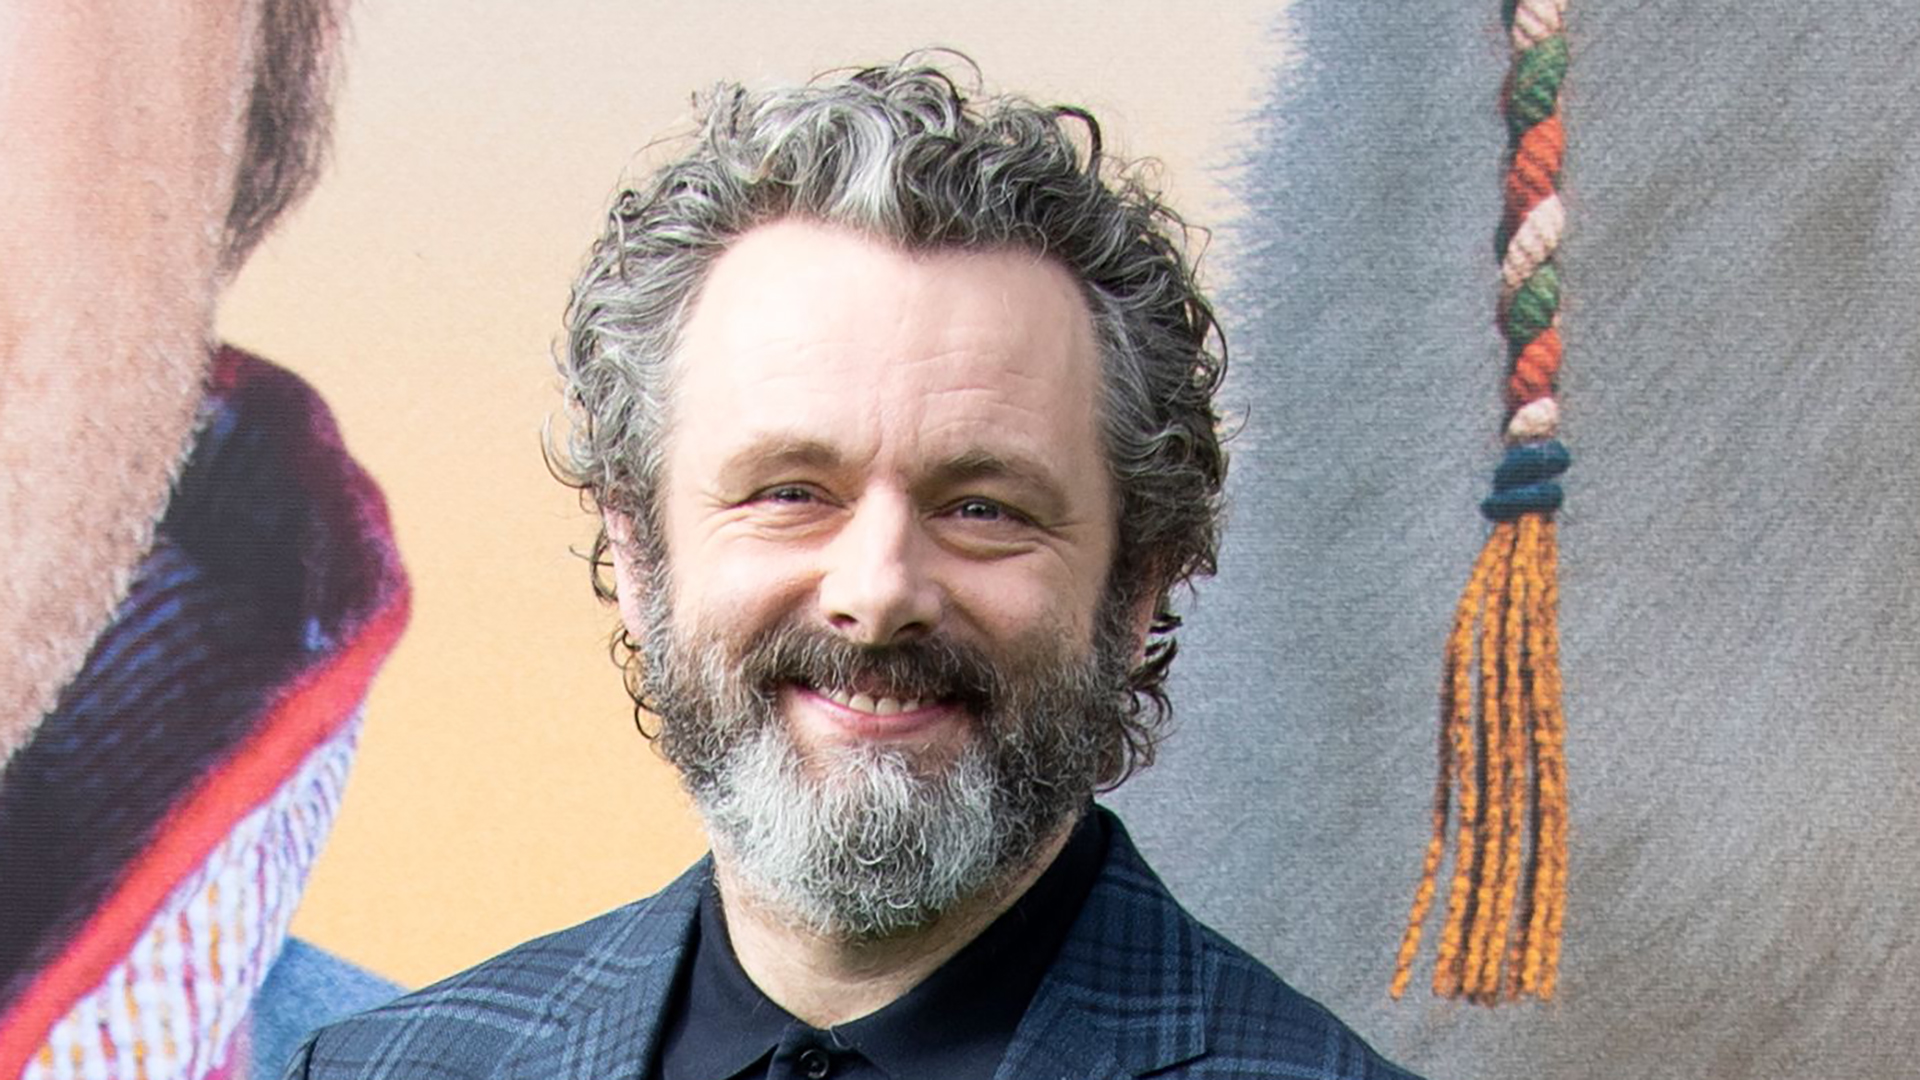 Michael Sheen Gives Super-Inspiring Speech to Wales' Soccer Team Ahead of World Cup